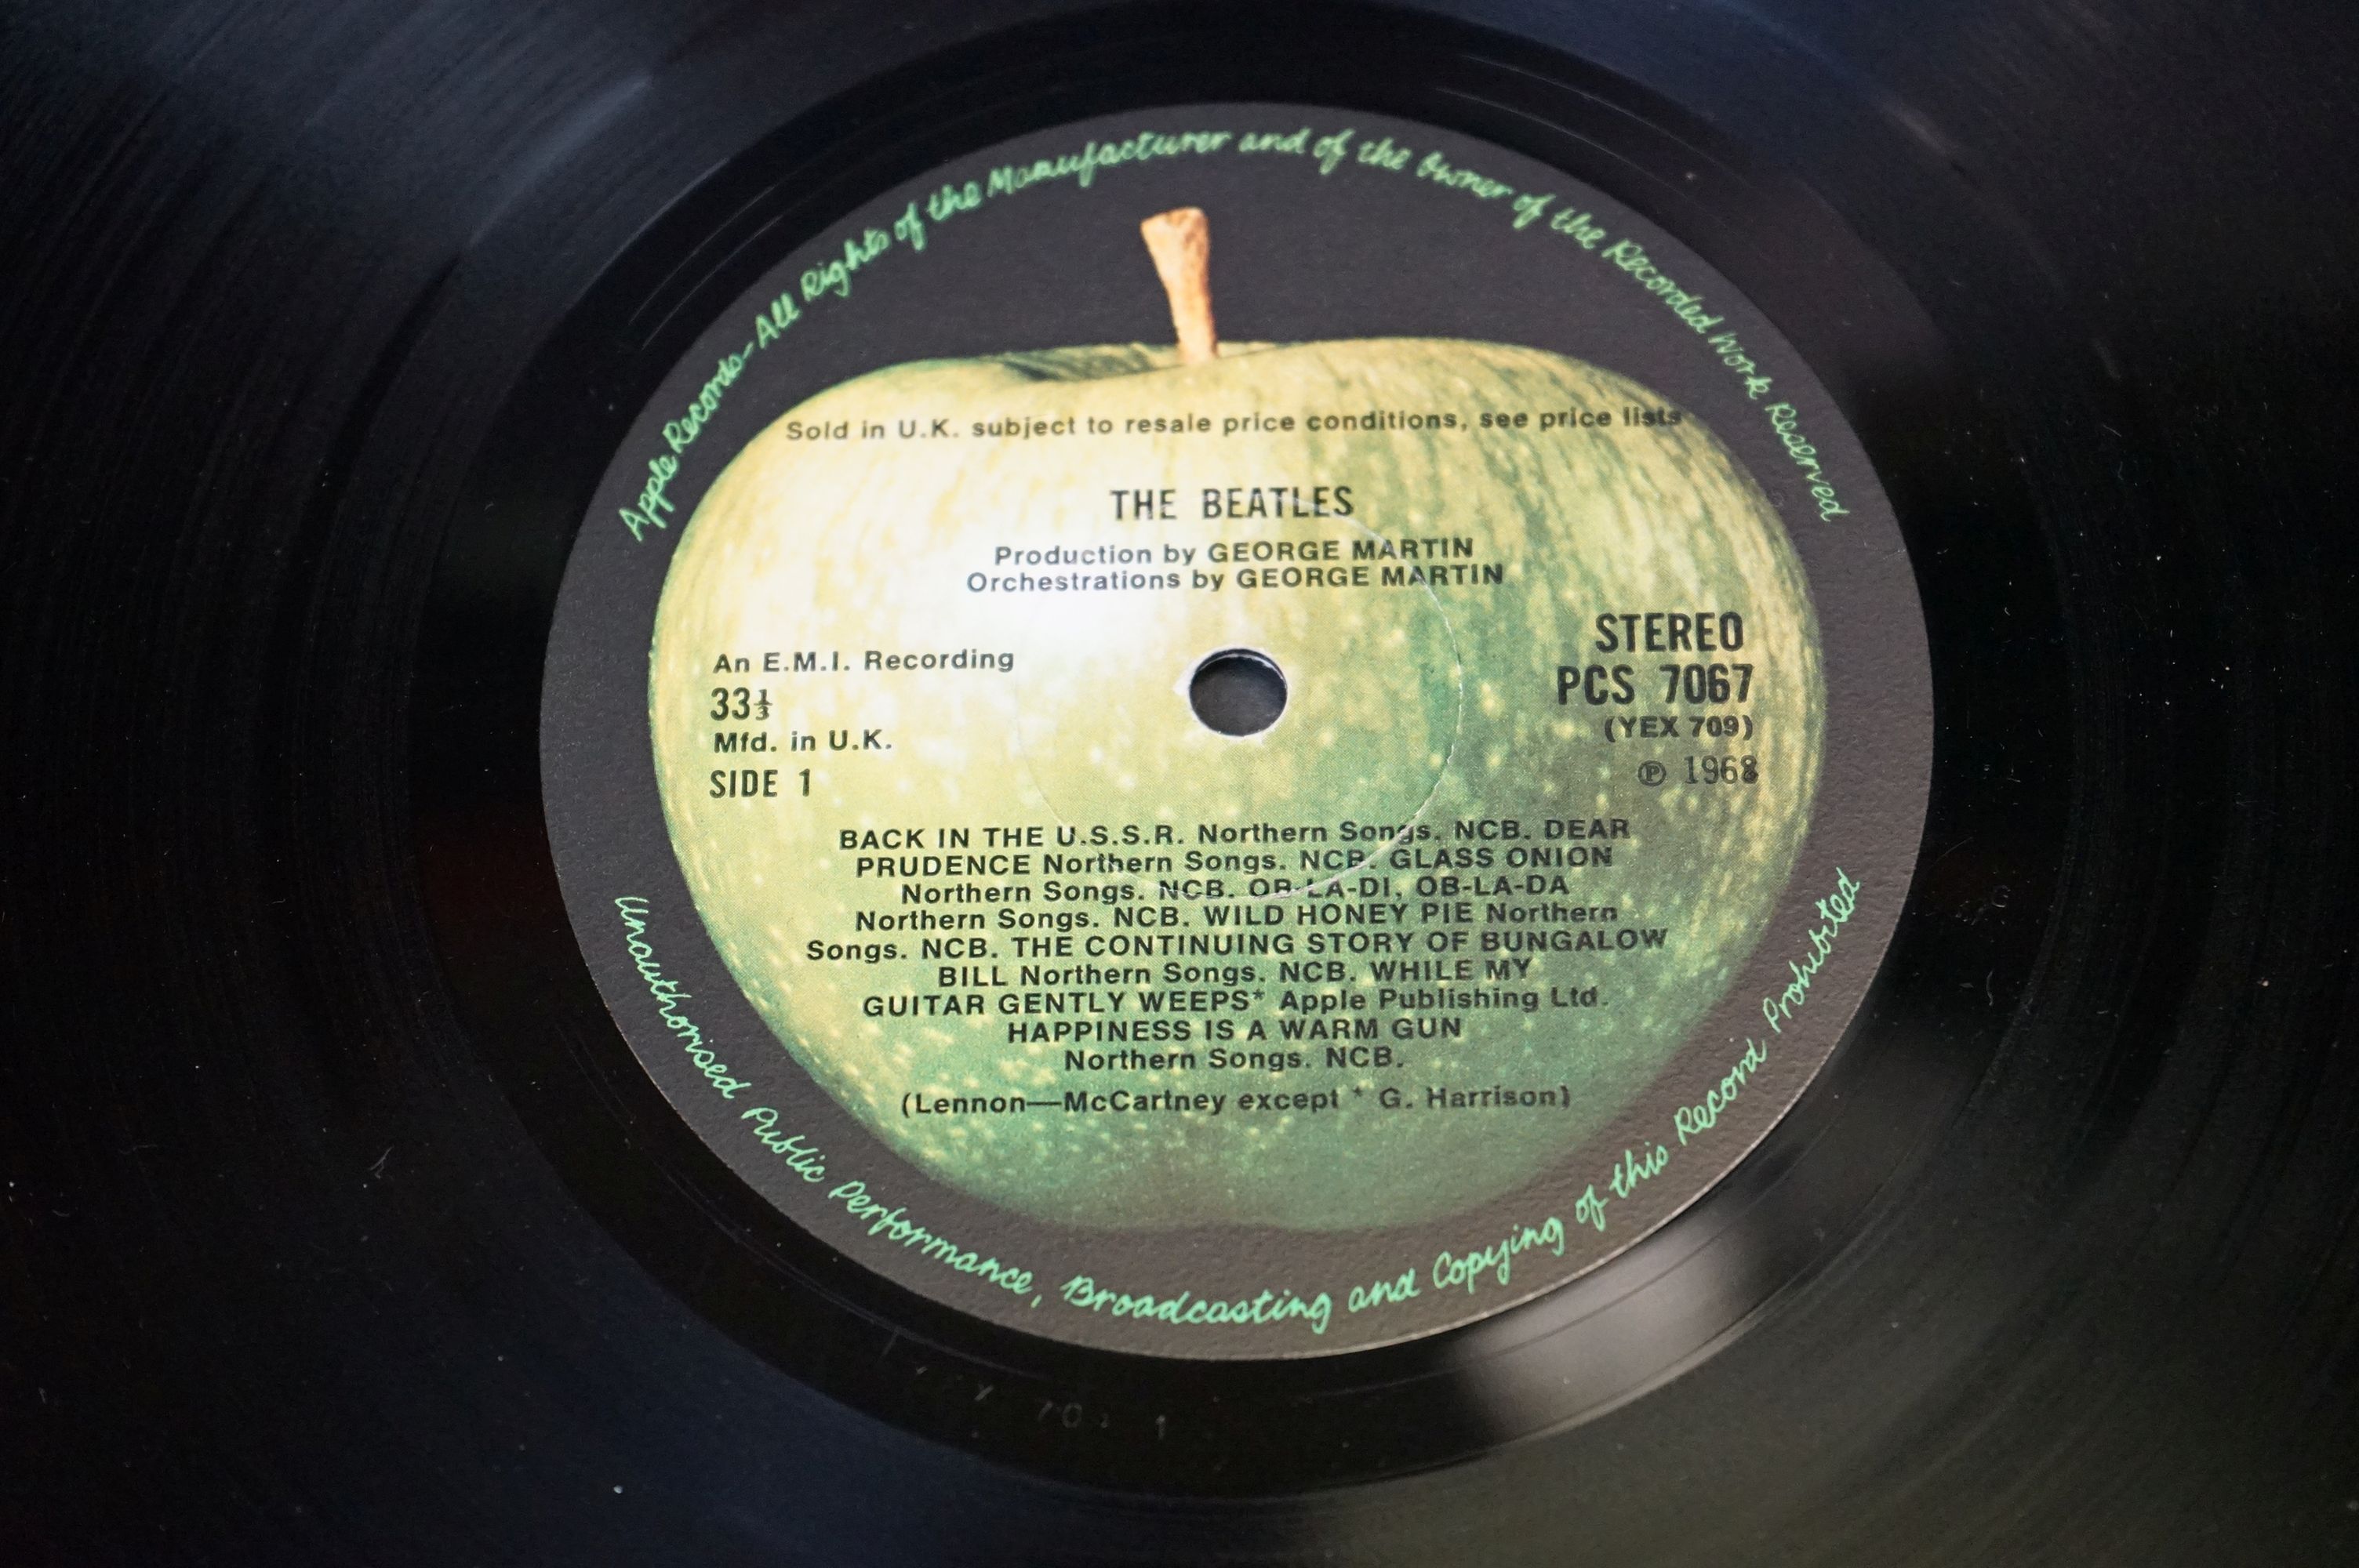 Vinyl - The Beatles White Album PCS 7067/8 low number 0016236. 4 photos and poster present. Sleeve - Image 7 of 9